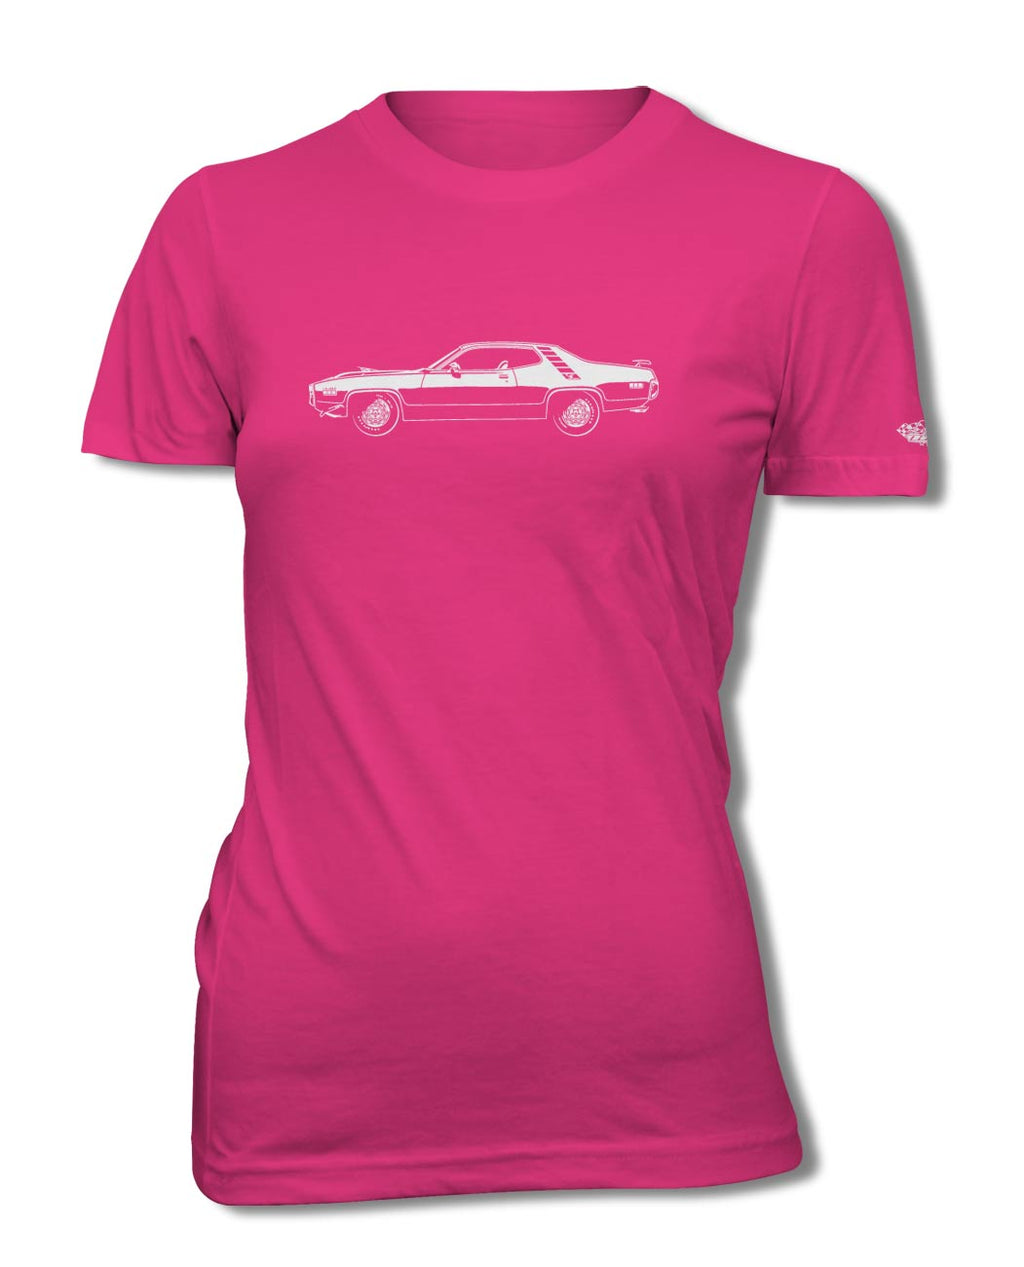 1971 Plymouth Road Runner 340 Coupe T-Shirt - Women - Side View